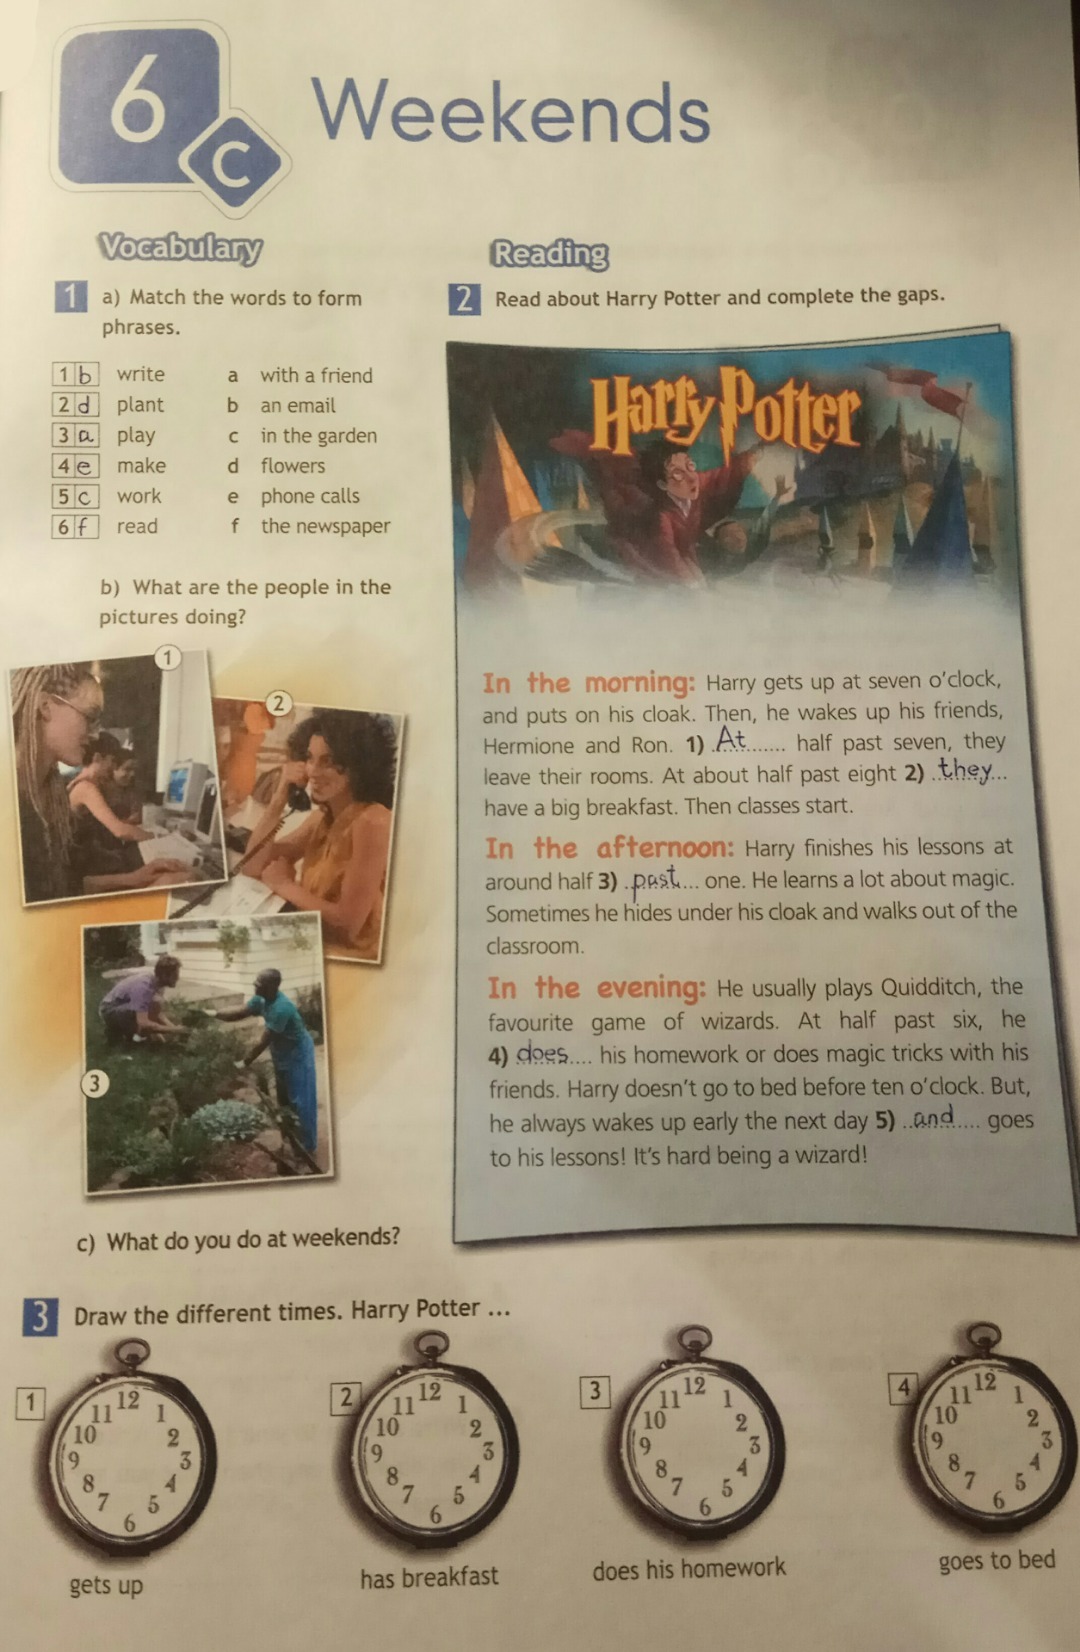 Weekend vocabulary. Read about Harry Potter and complete the gaps ответы. Read about Harry Potter. Draw the different times Harry Potter gets up has Breakfast 5 класс. Draw the different times.Harry Potter.